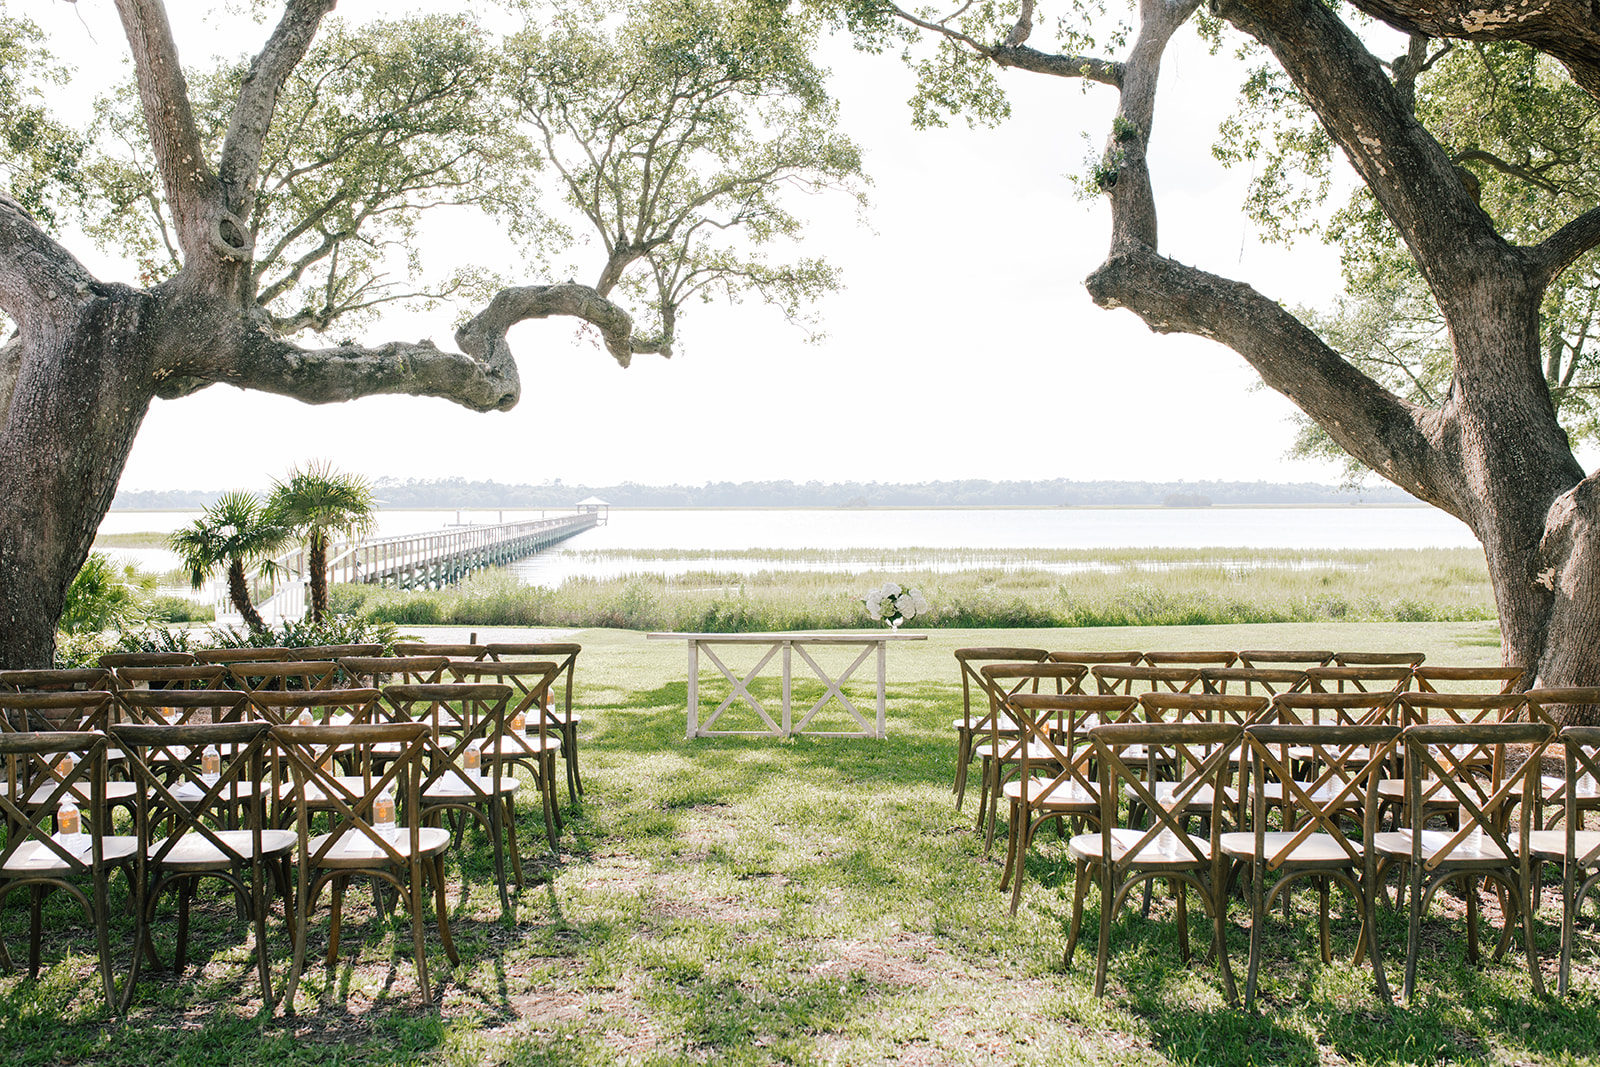 Intimate waterfront wedding at Lowndes Grove